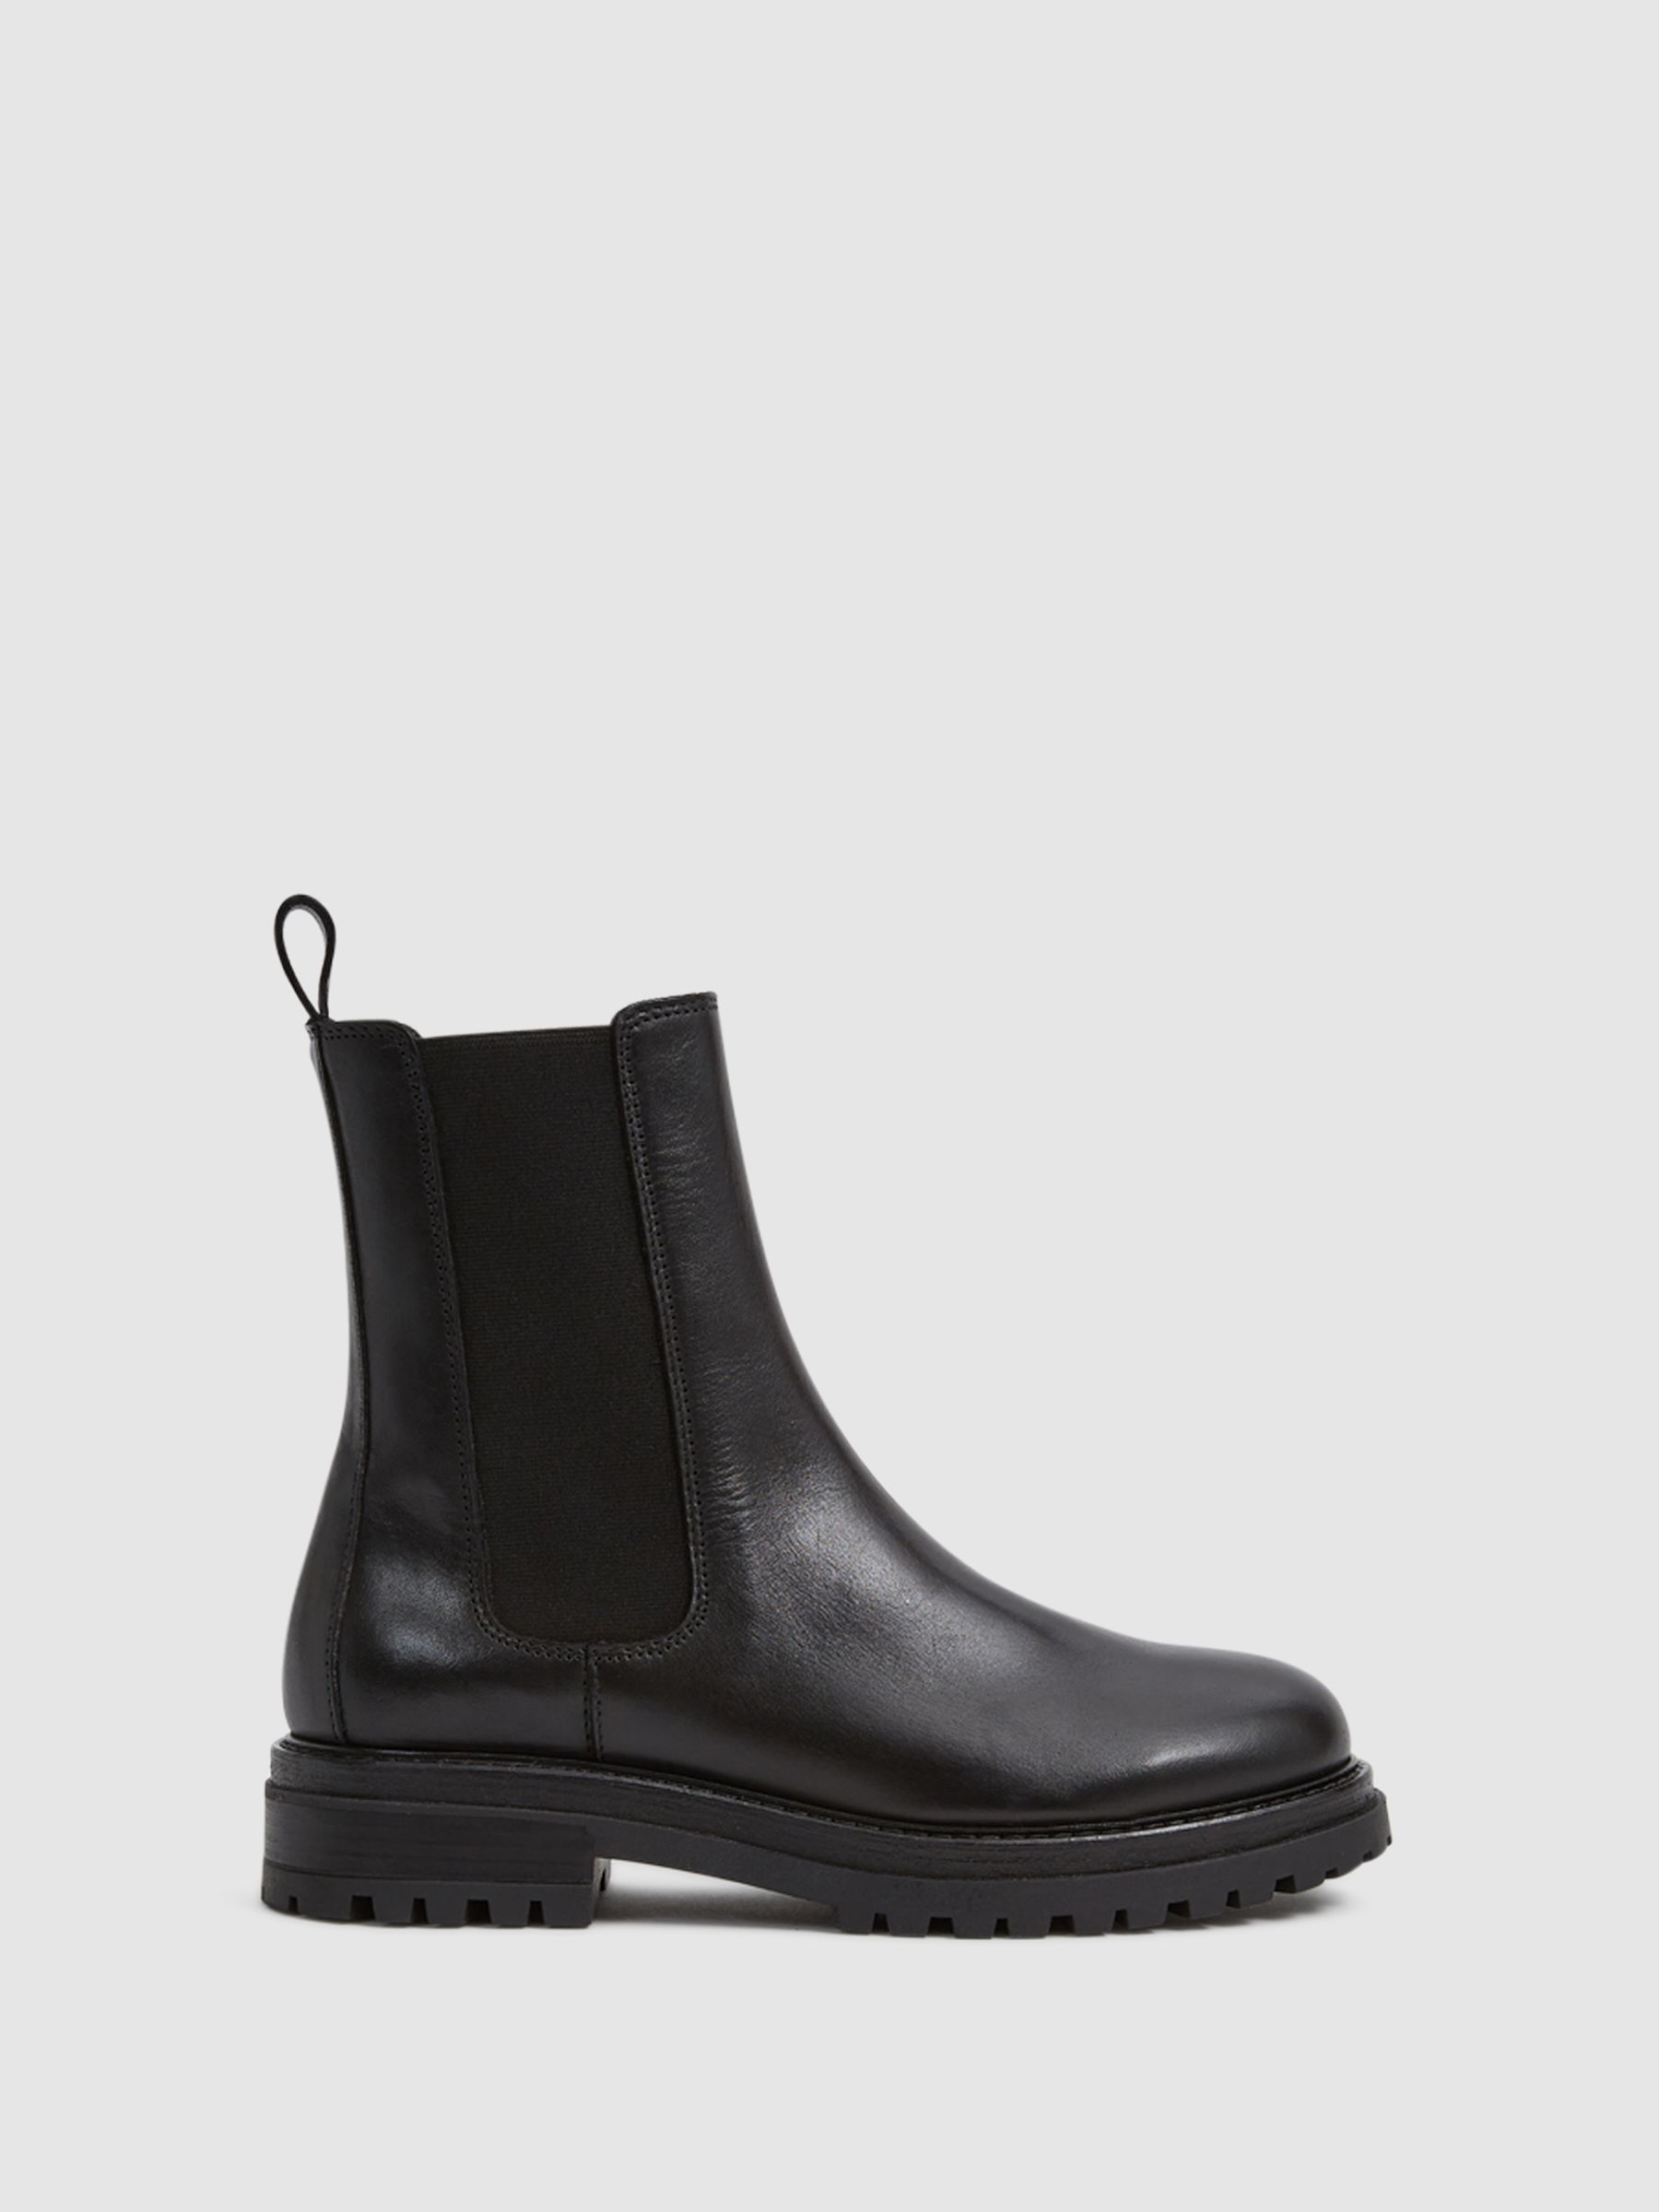 Reiss Thea Boots Leather Pull On Chelsea Boots - REISS